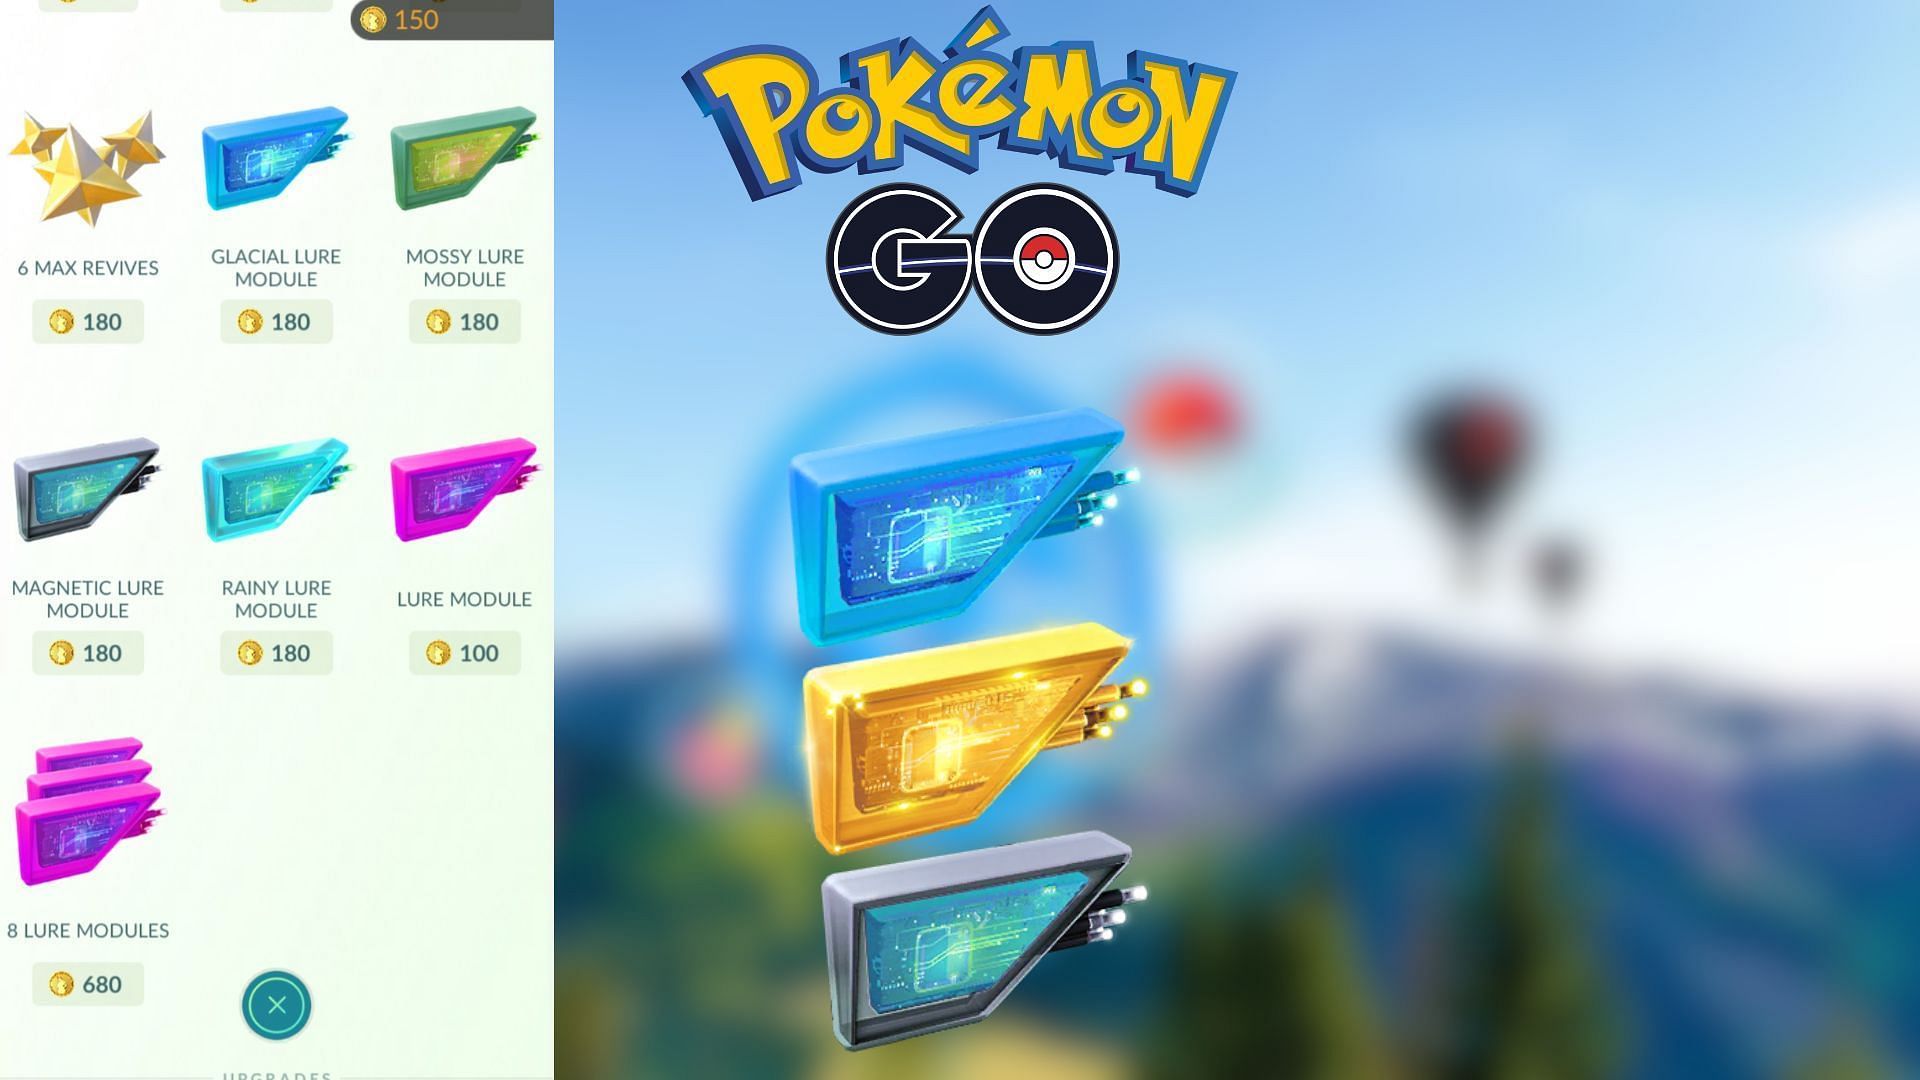 Pokemon GO Magnetic Lure List With Glacial And Mossy Modules On Deck